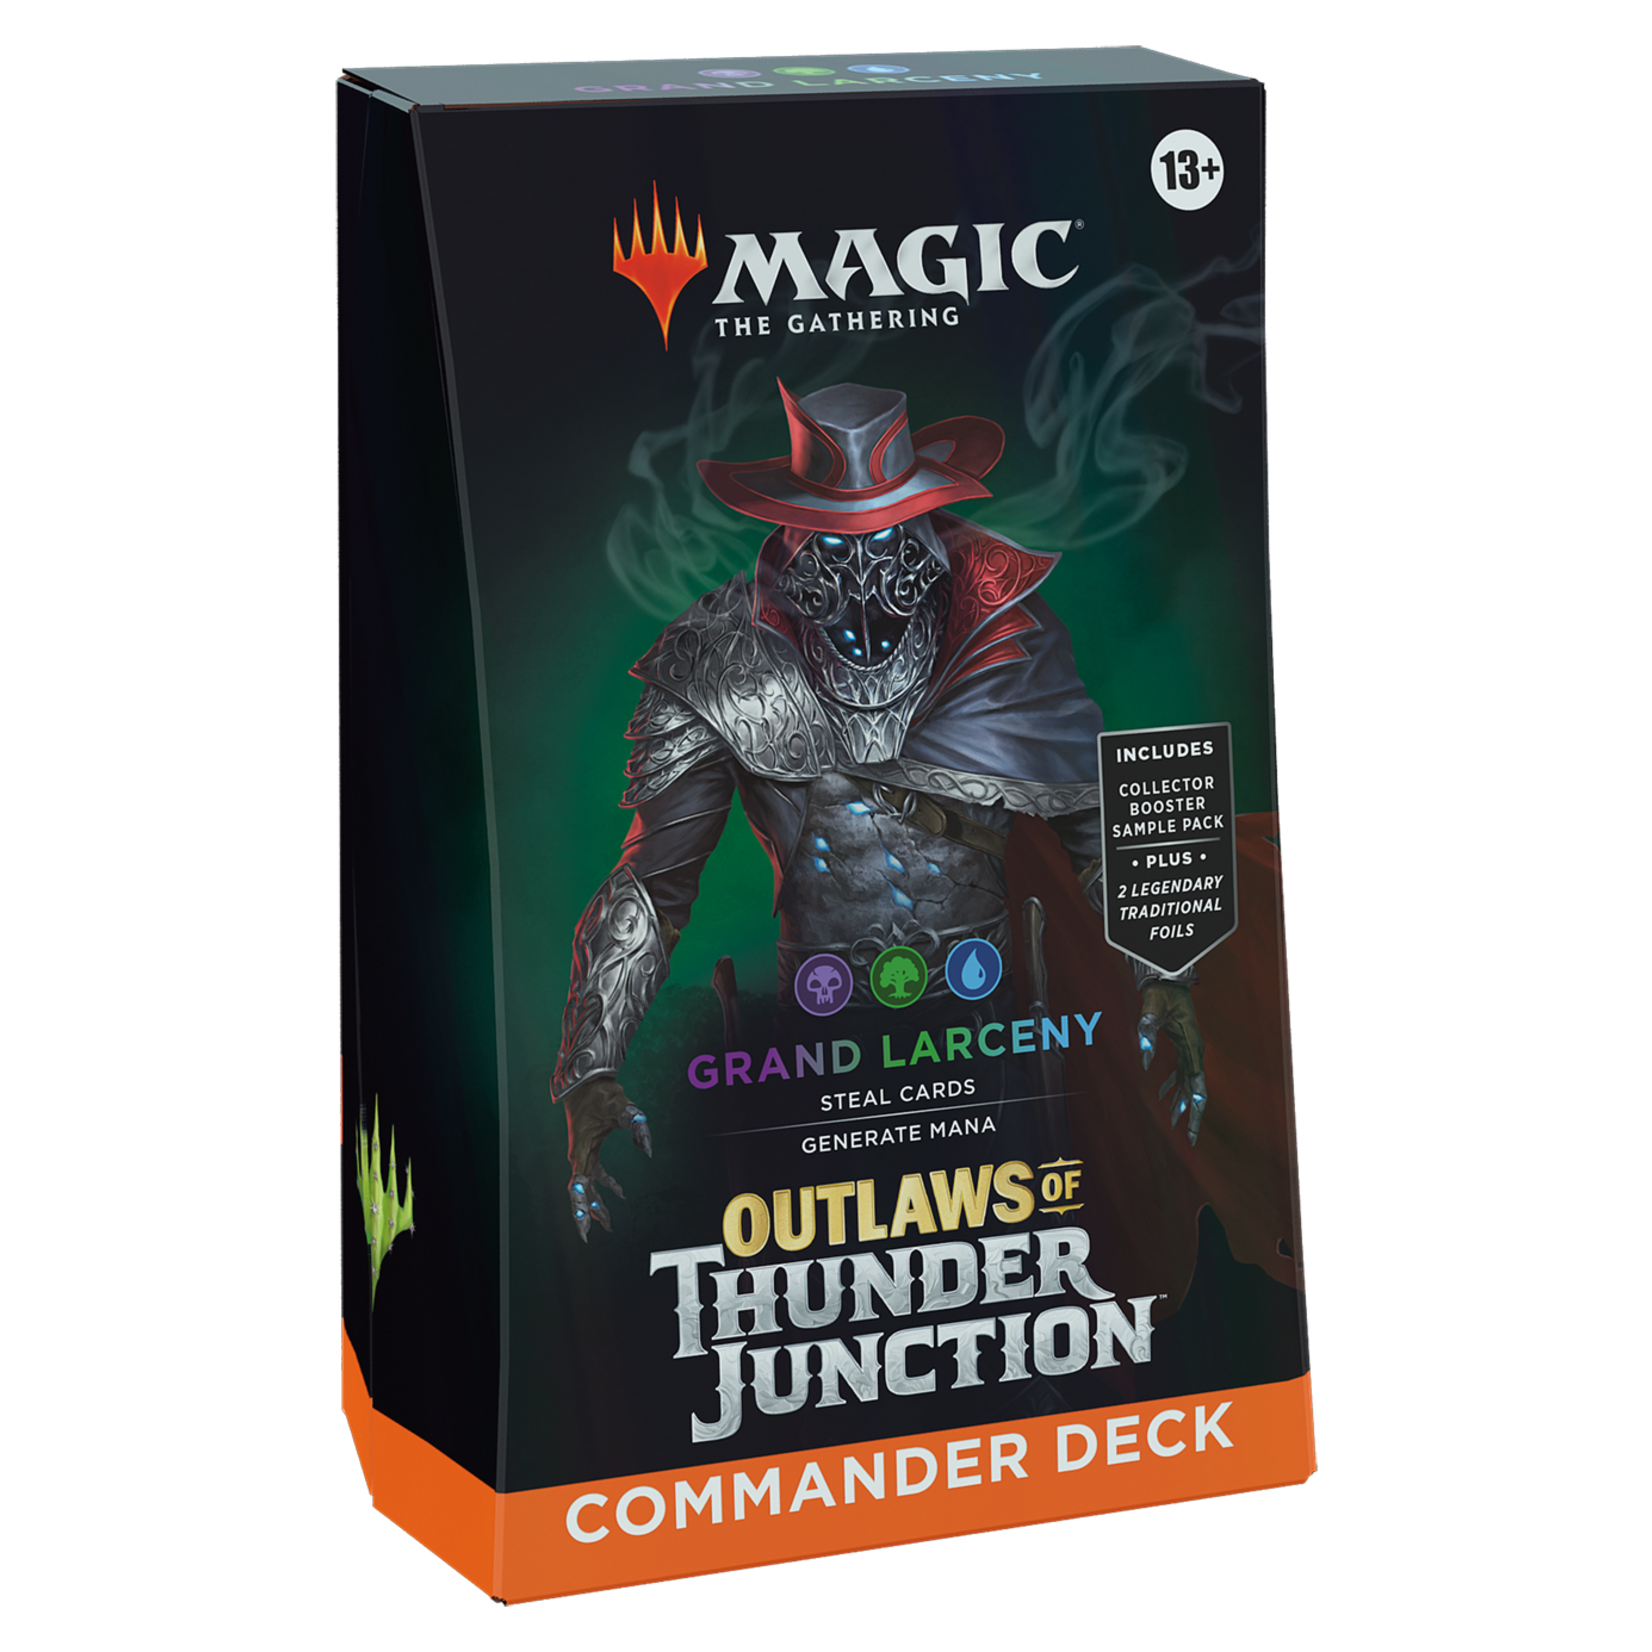 Wizards of the Coast Magic - Outlaws of Thunder Junction Commander Deck "Grand Larceny" Green / Black / Blue